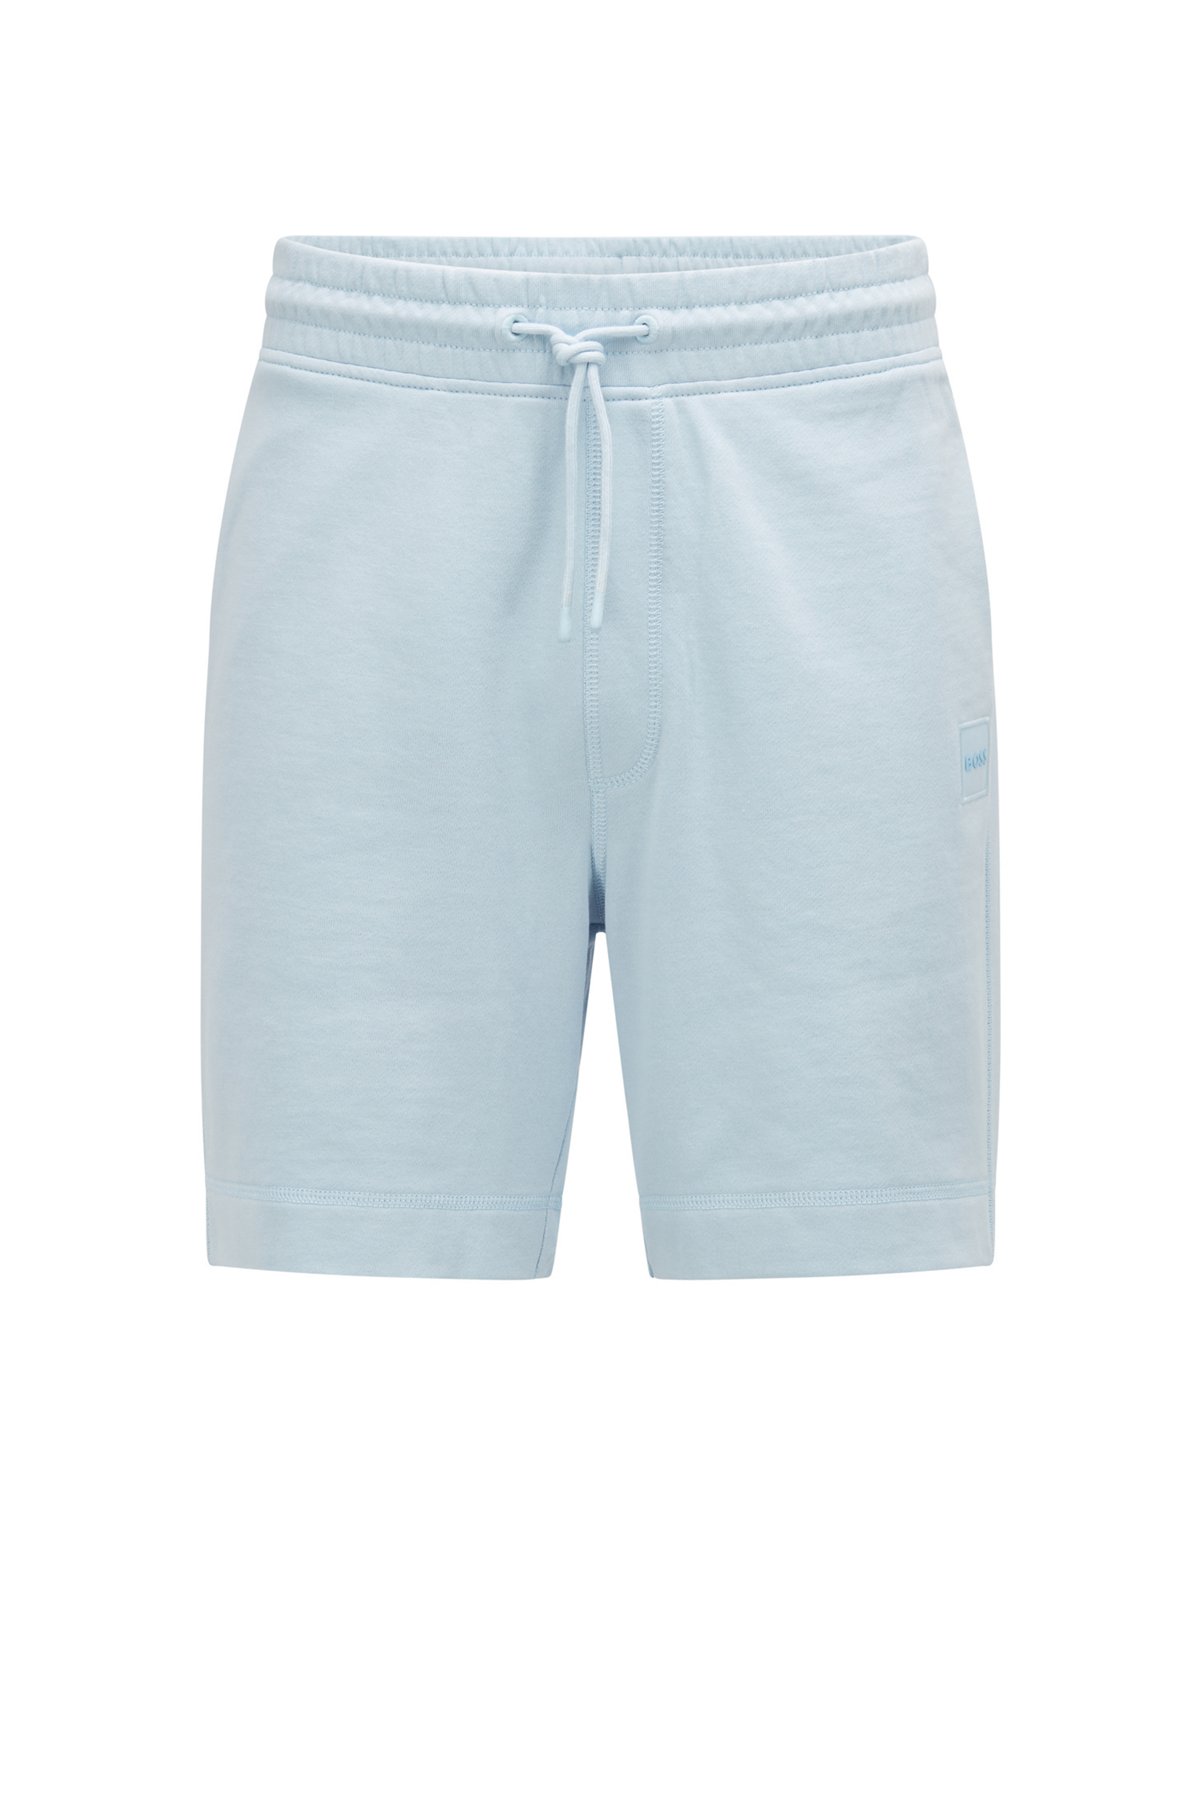 Drawstring shorts in French terry cotton with logo patch, Light Blue